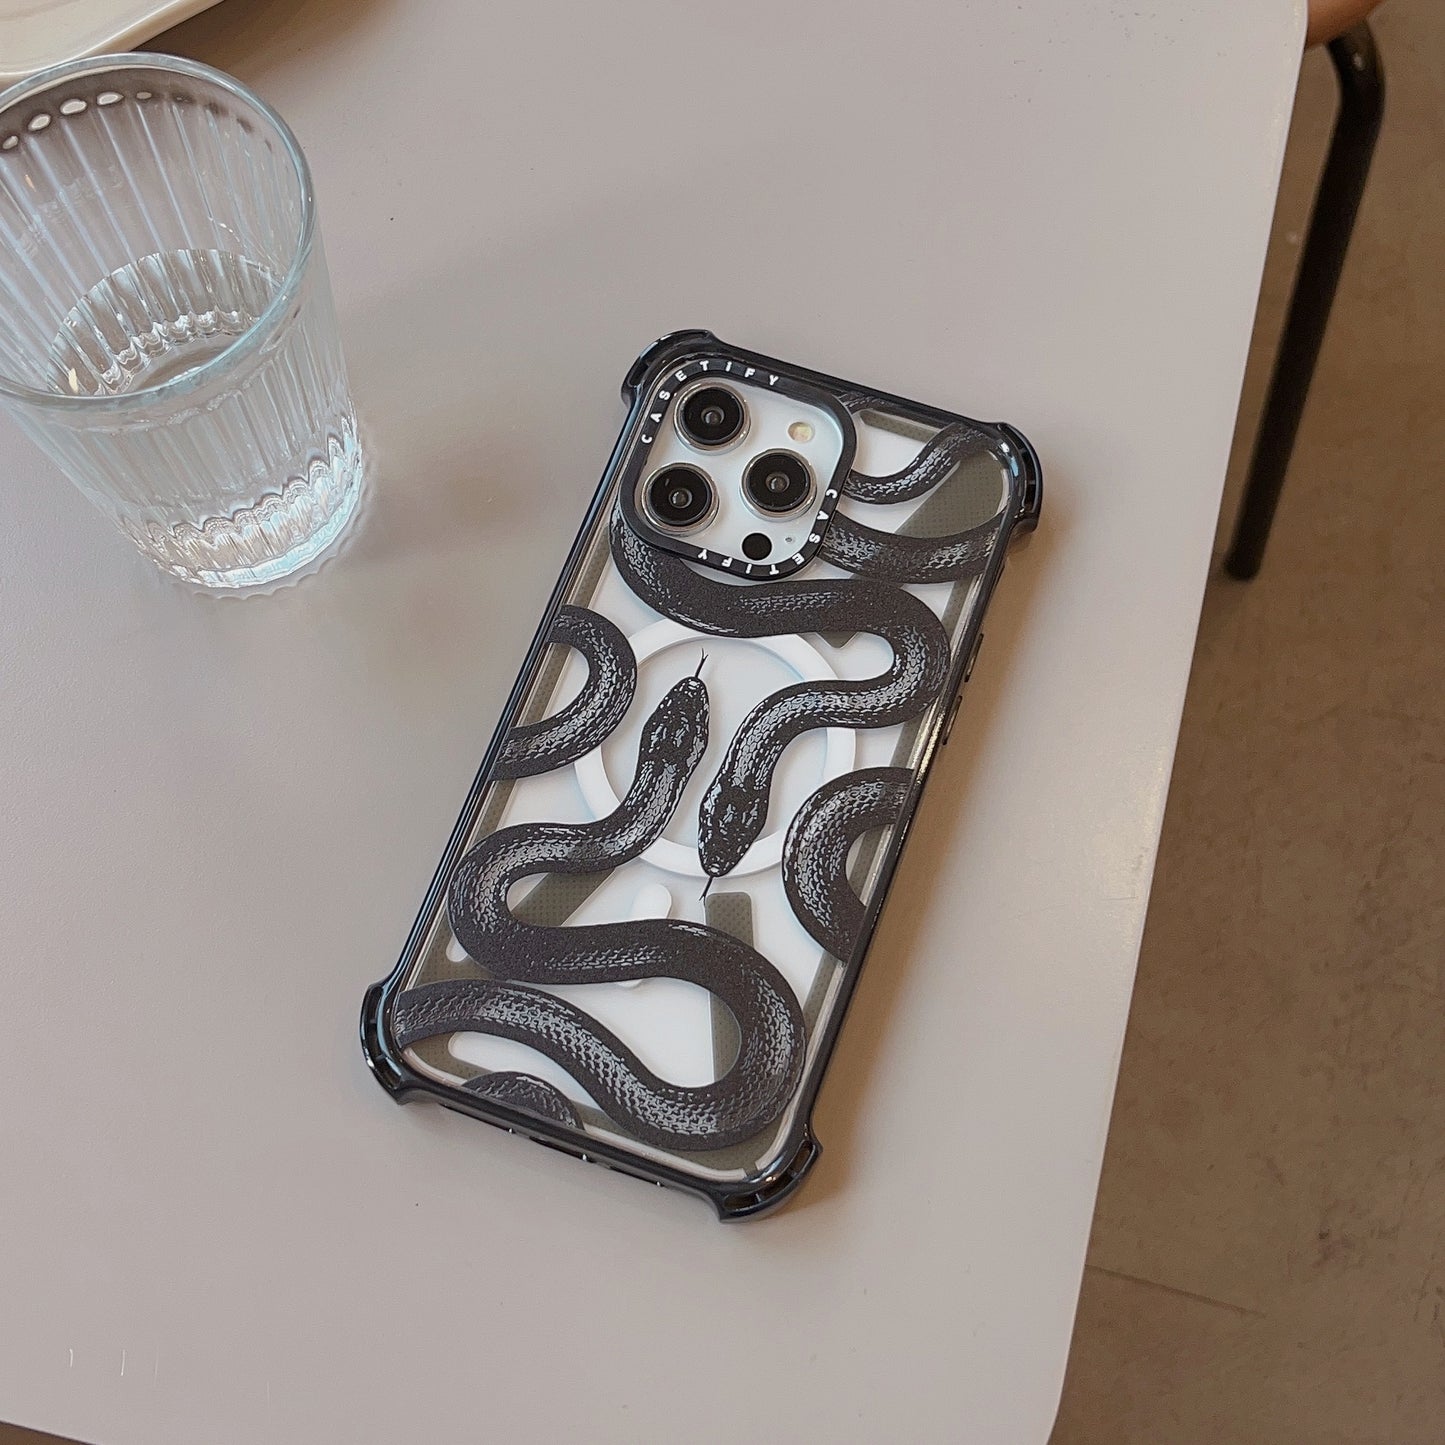 The new iPhone Case Black Snake King